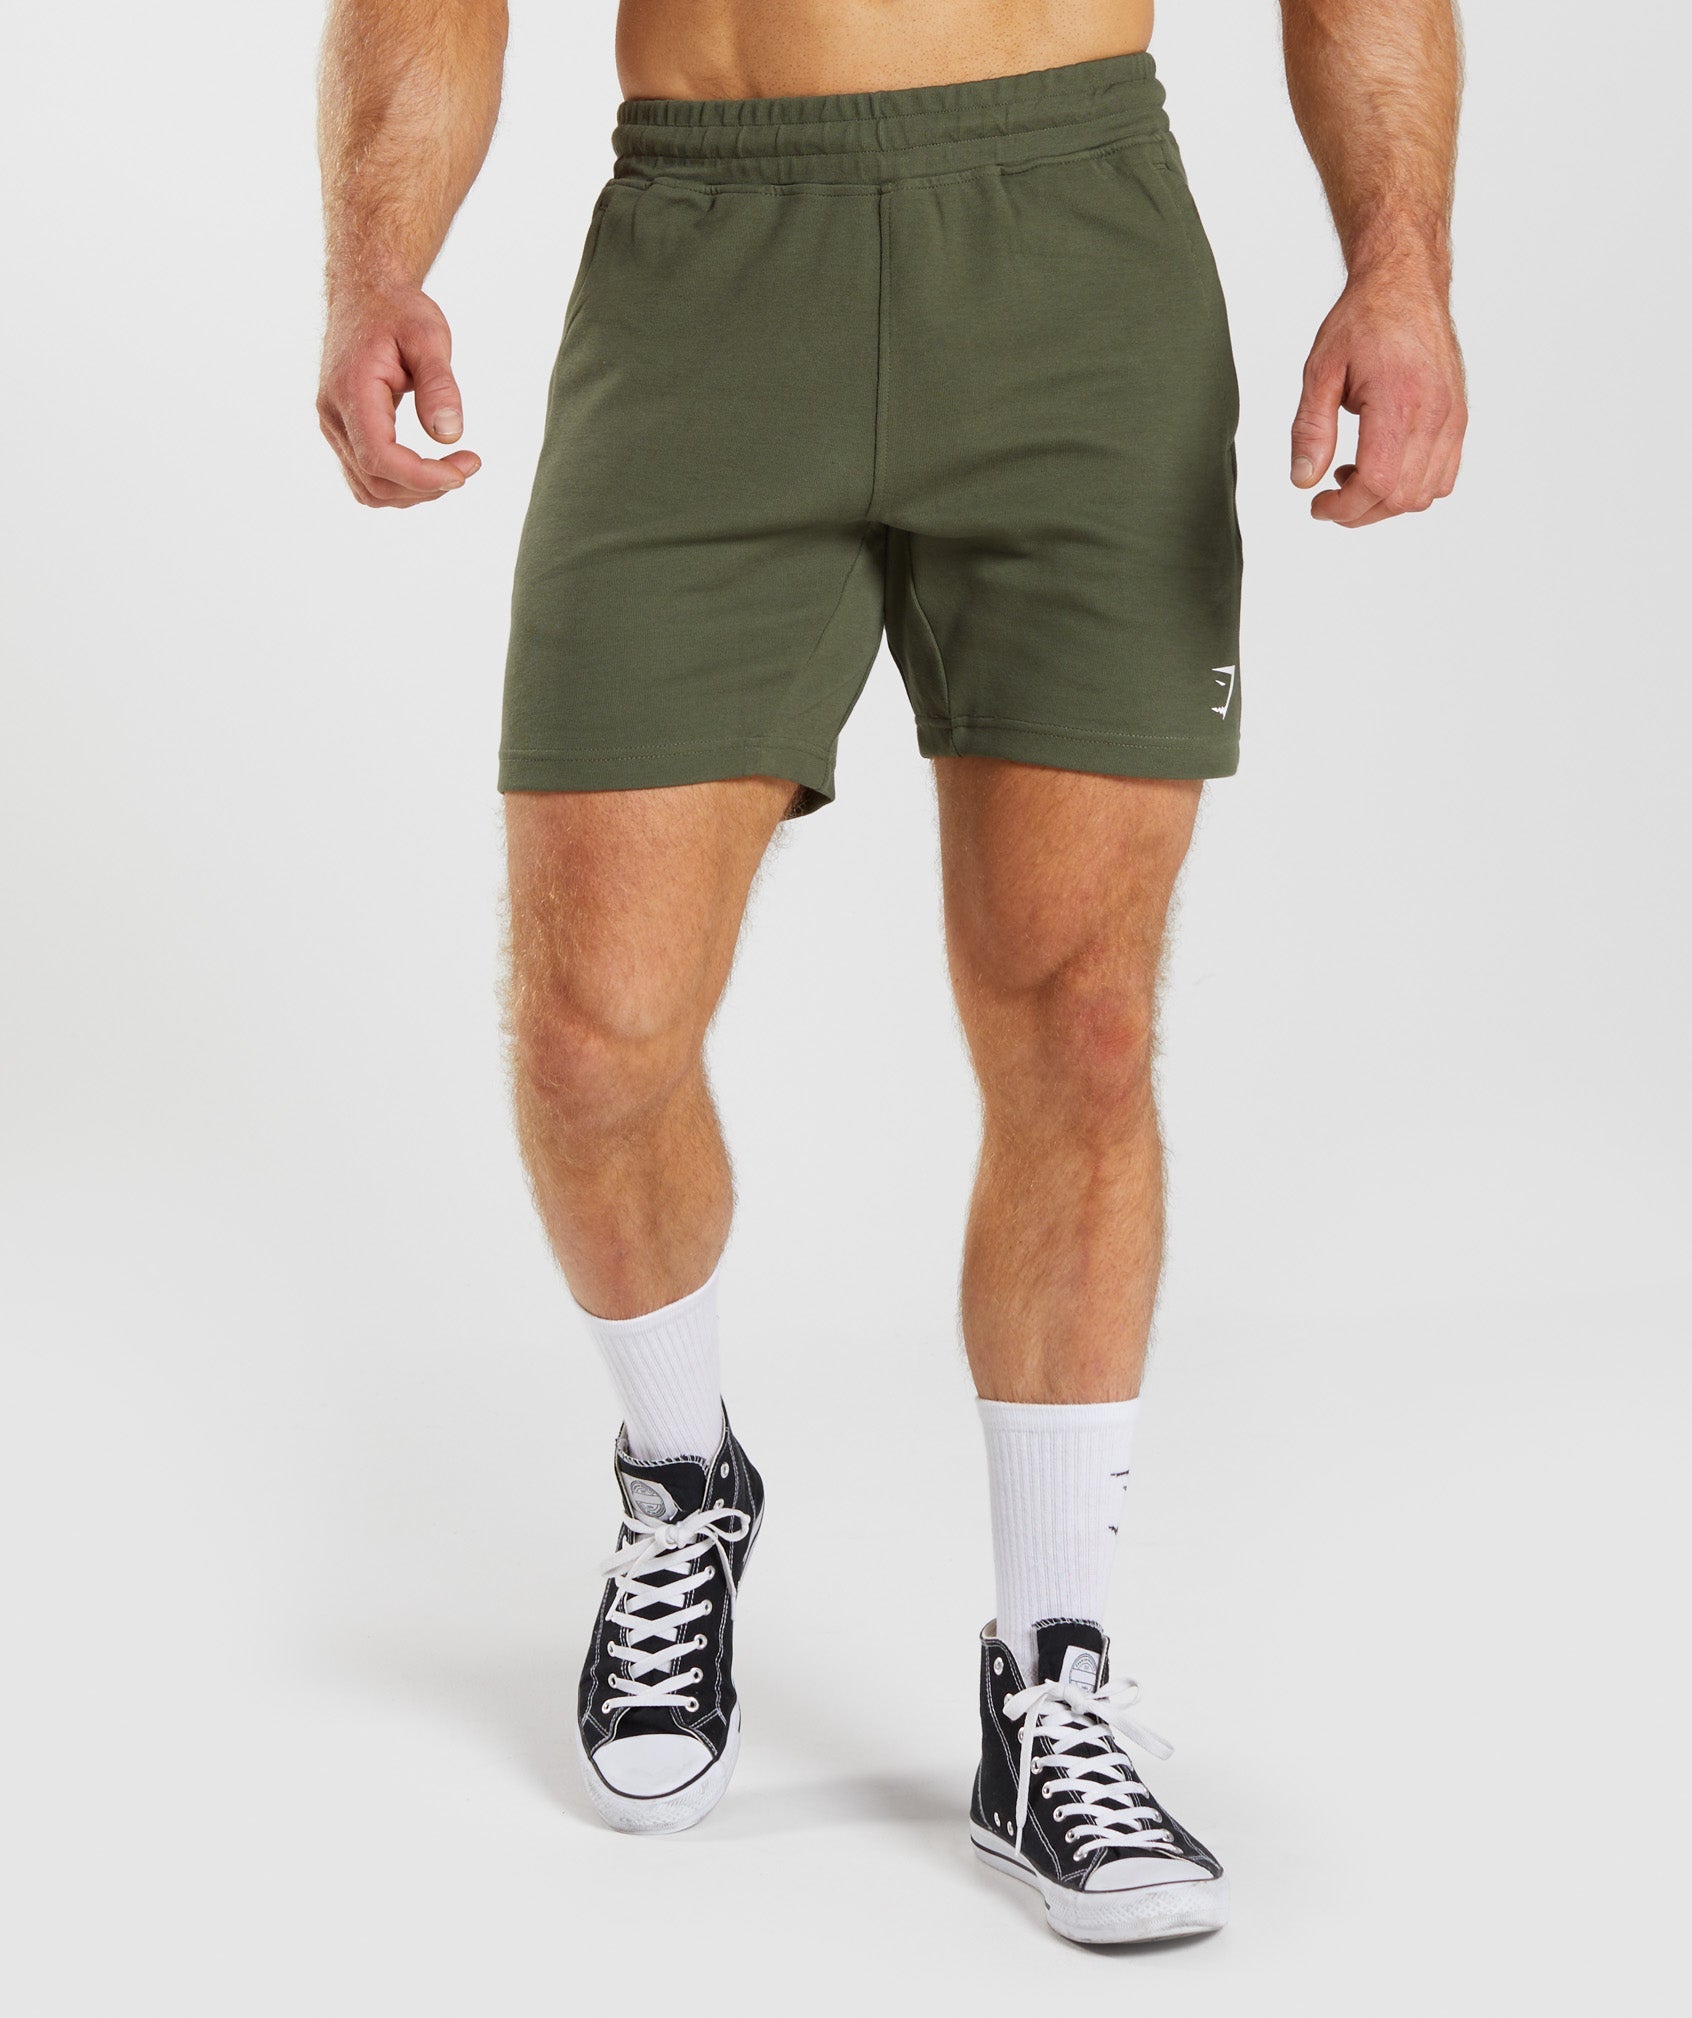 React 7" Shorts in Core Olive - view 1